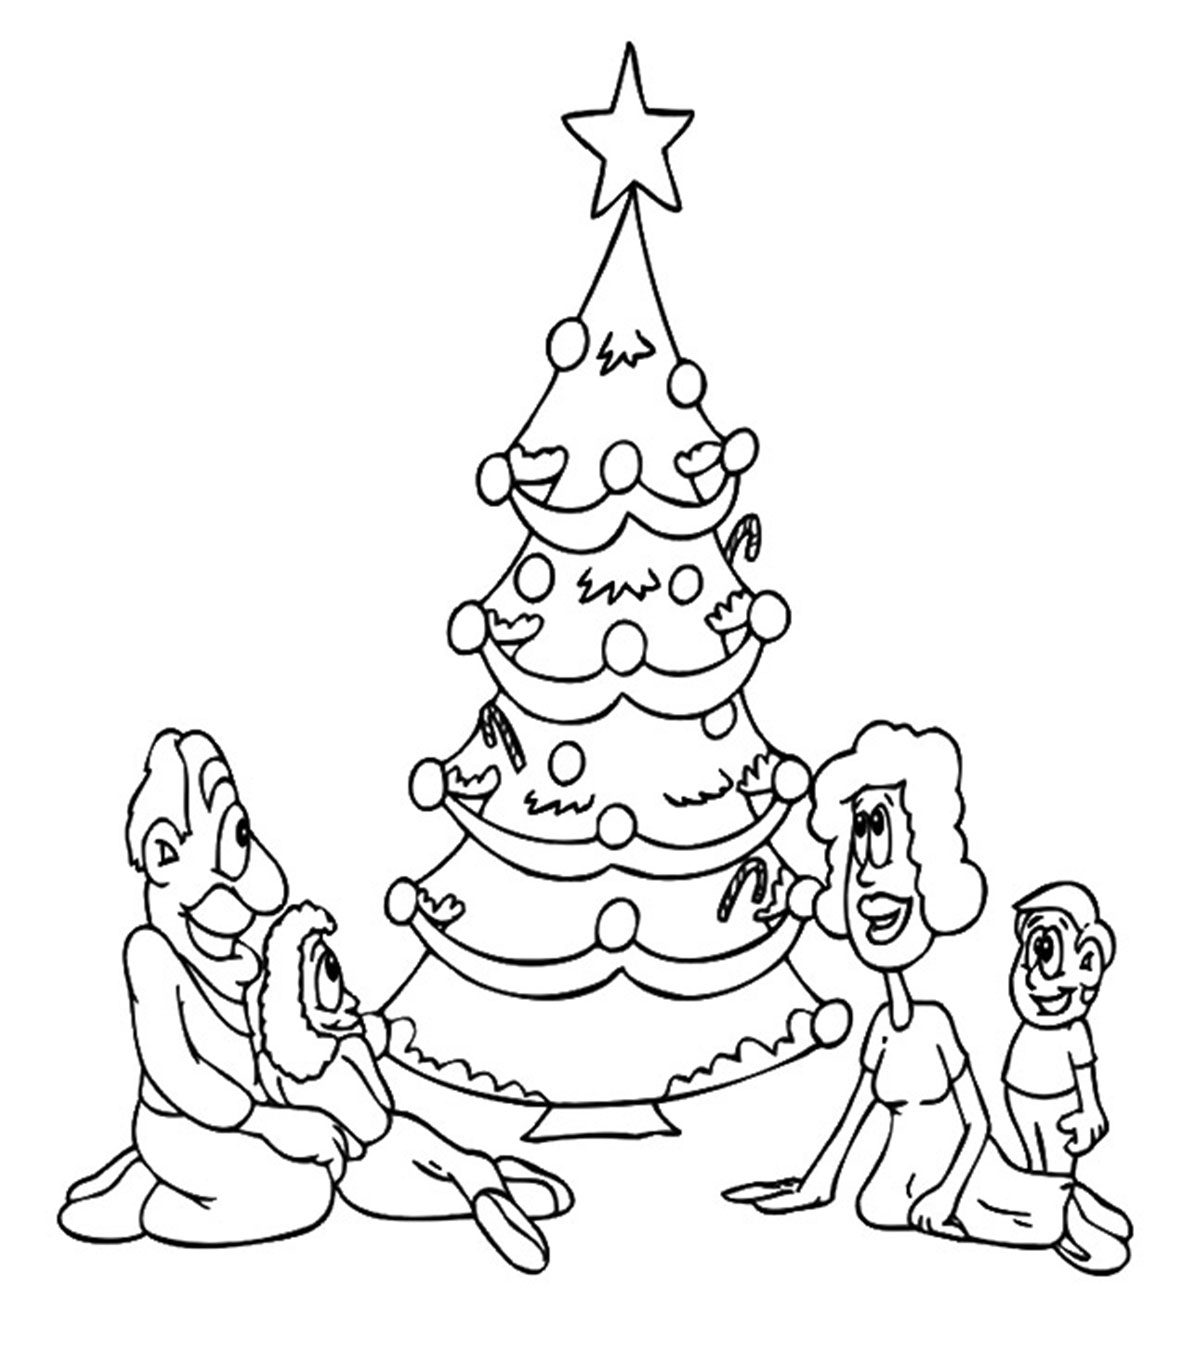 Top 35 Christmas Tree Coloring Pages For Your Little Ones